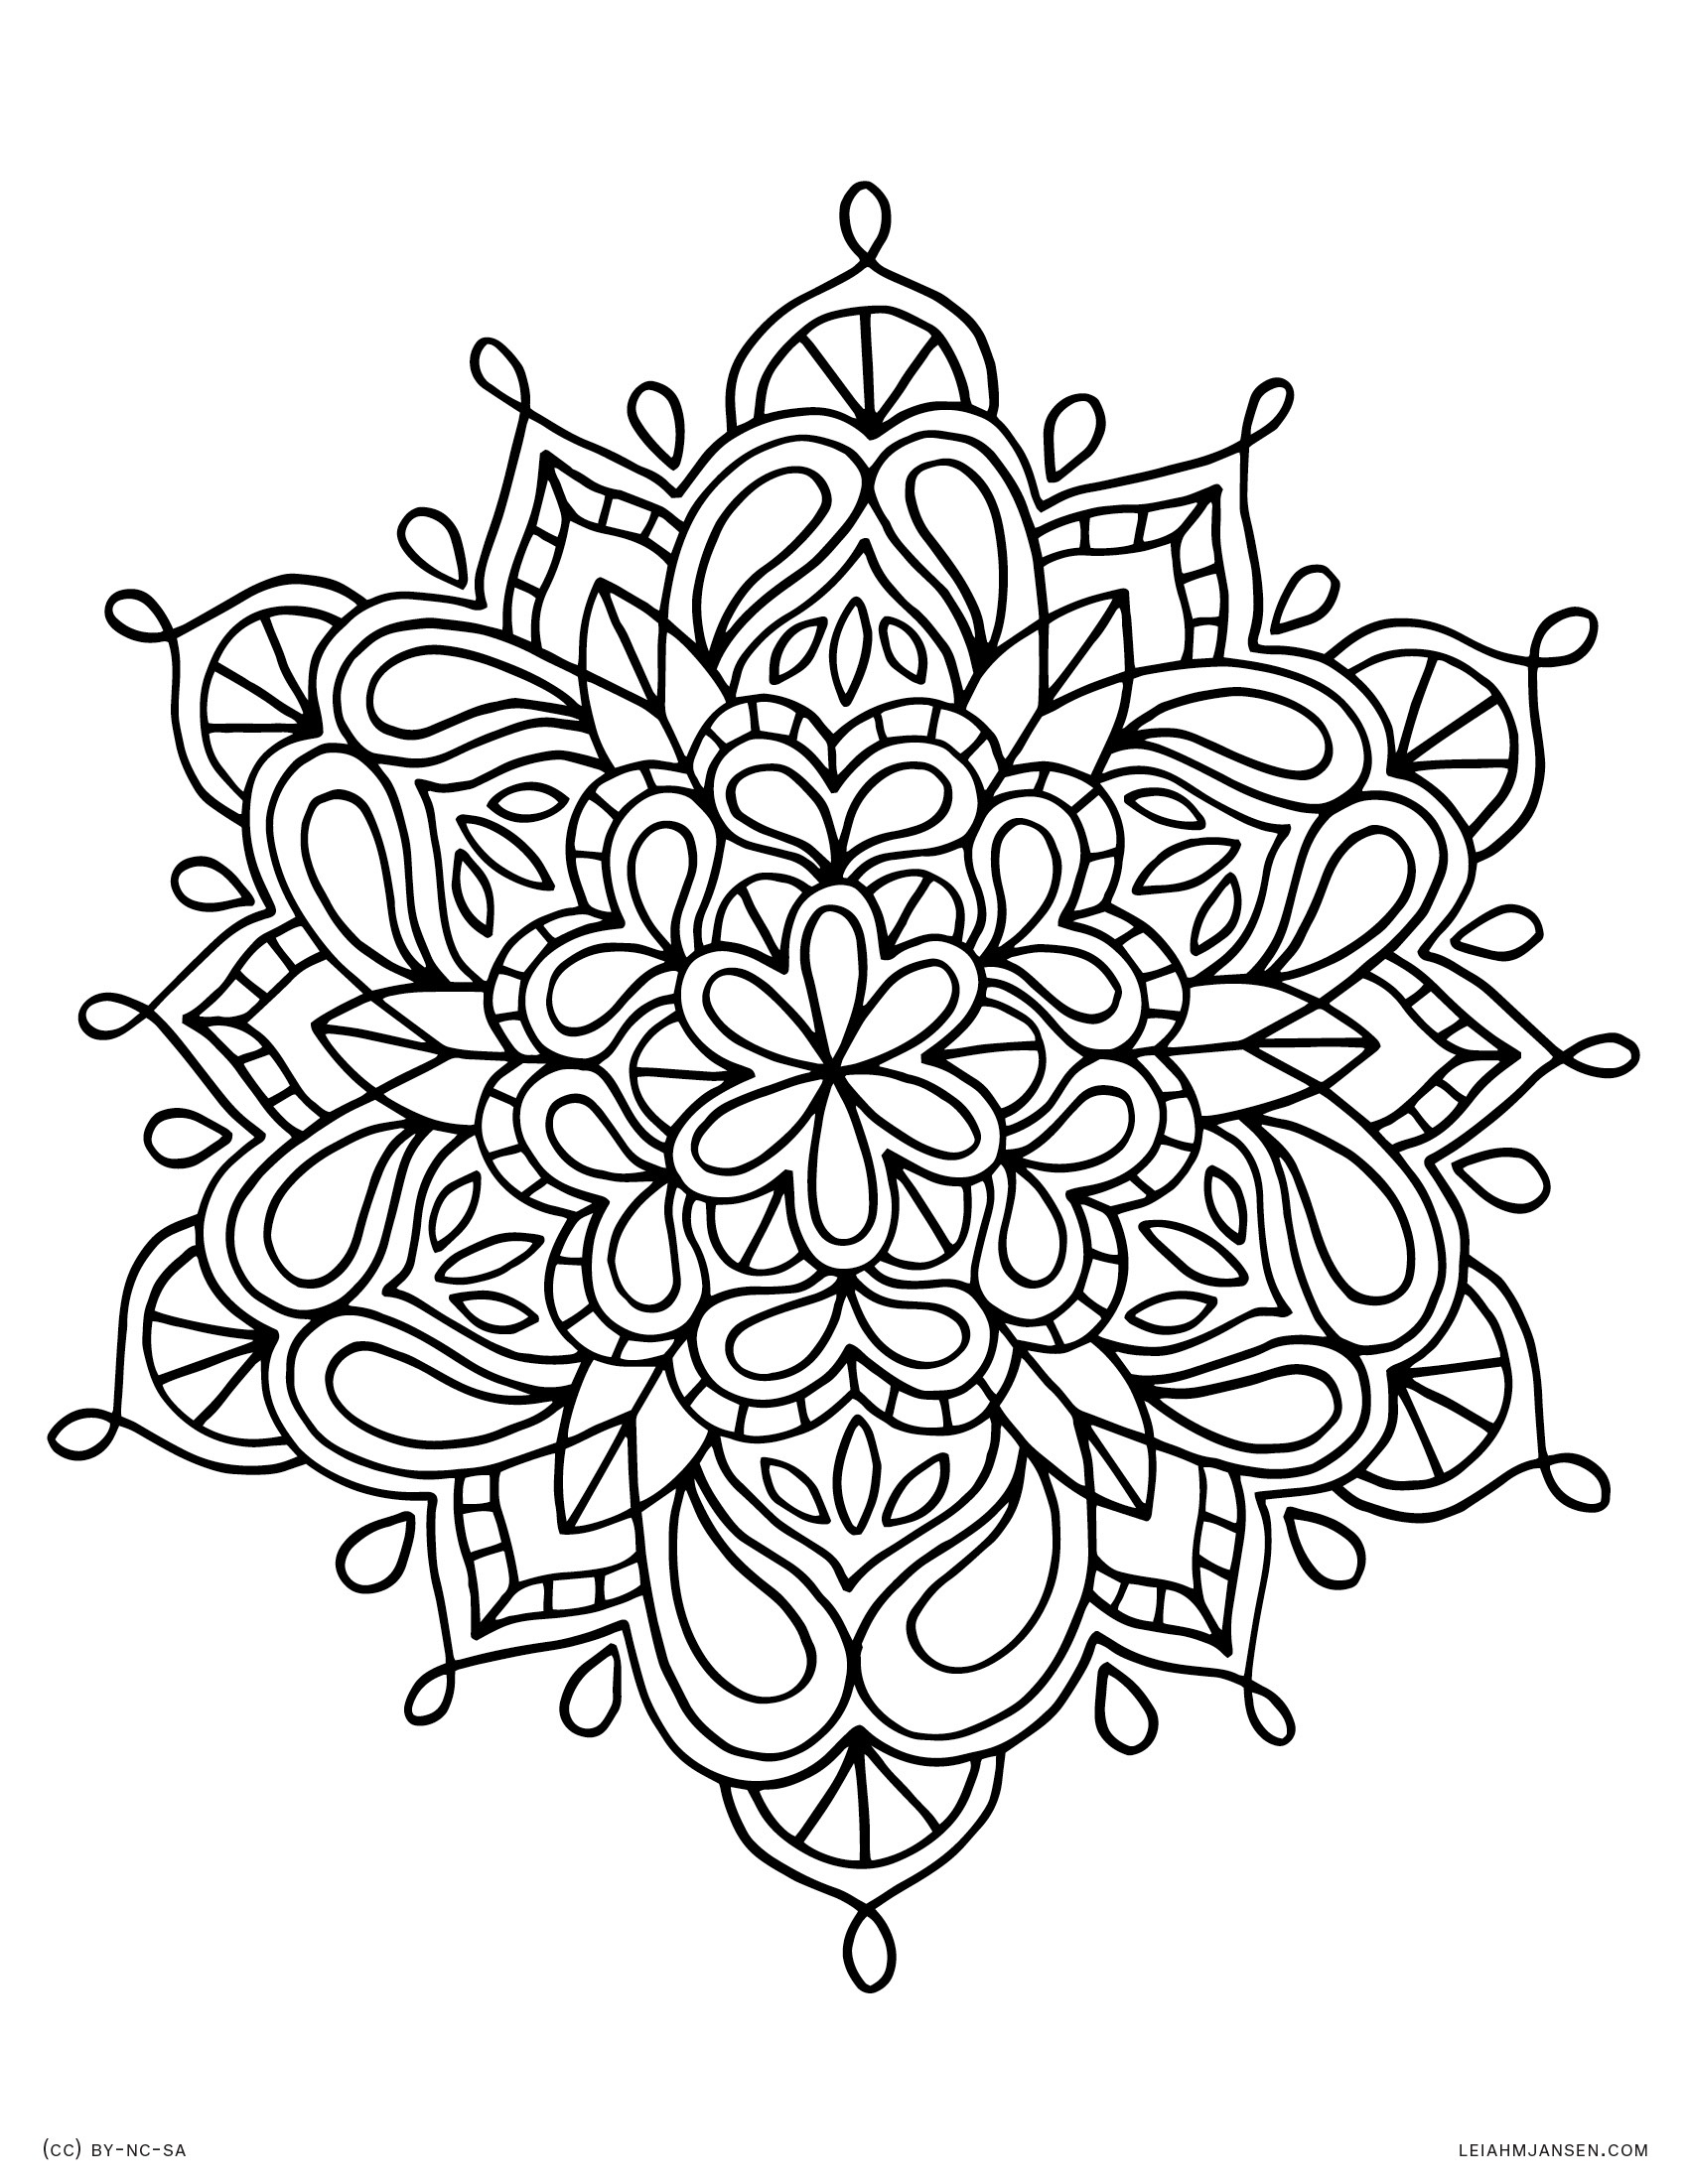 Coloring Pages - Free Printable Coloring Pages